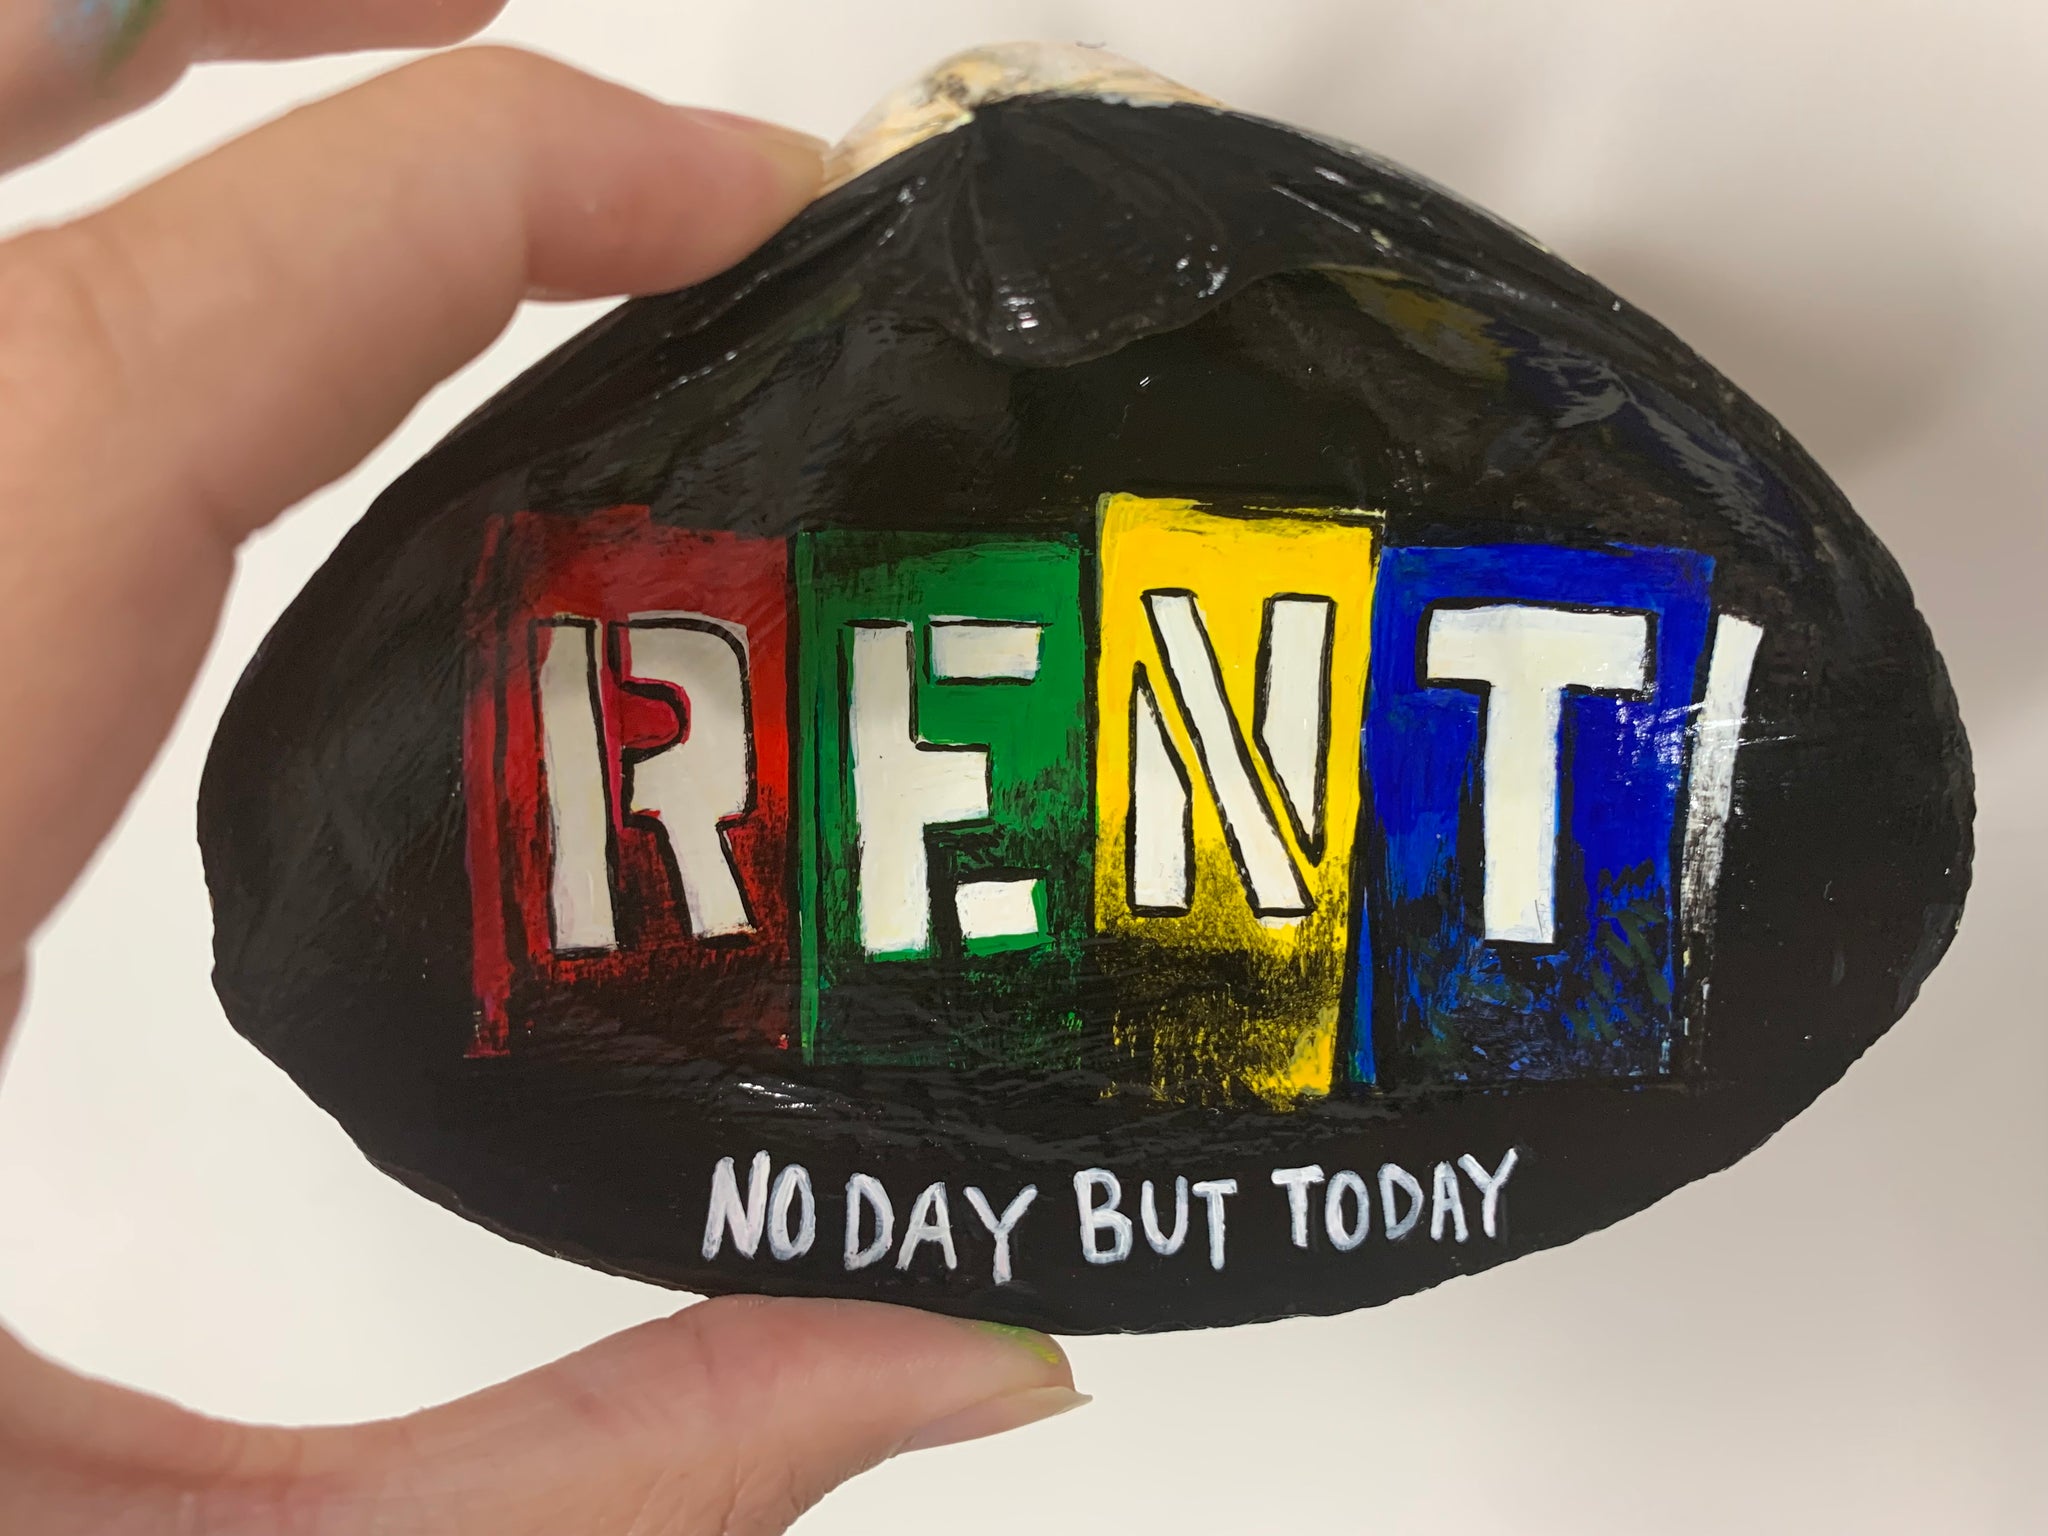 Rent hand painted